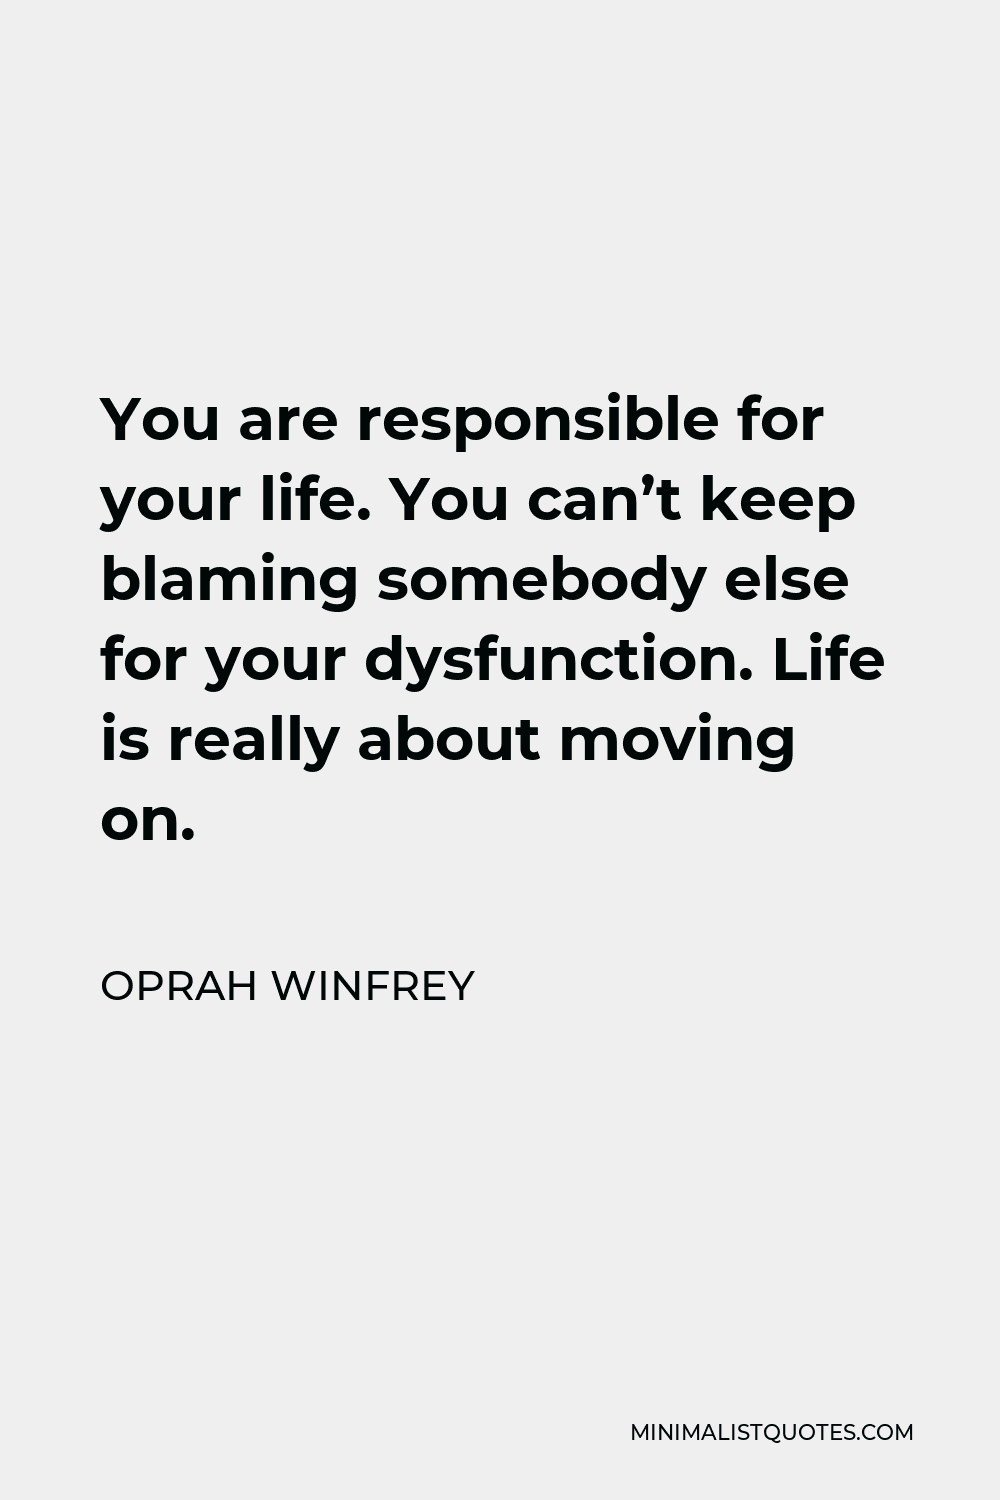 Oprah Winfrey Quote - You are responsible for your life. You can’t keep blaming somebody else for your dysfunction. Life is really about moving on.